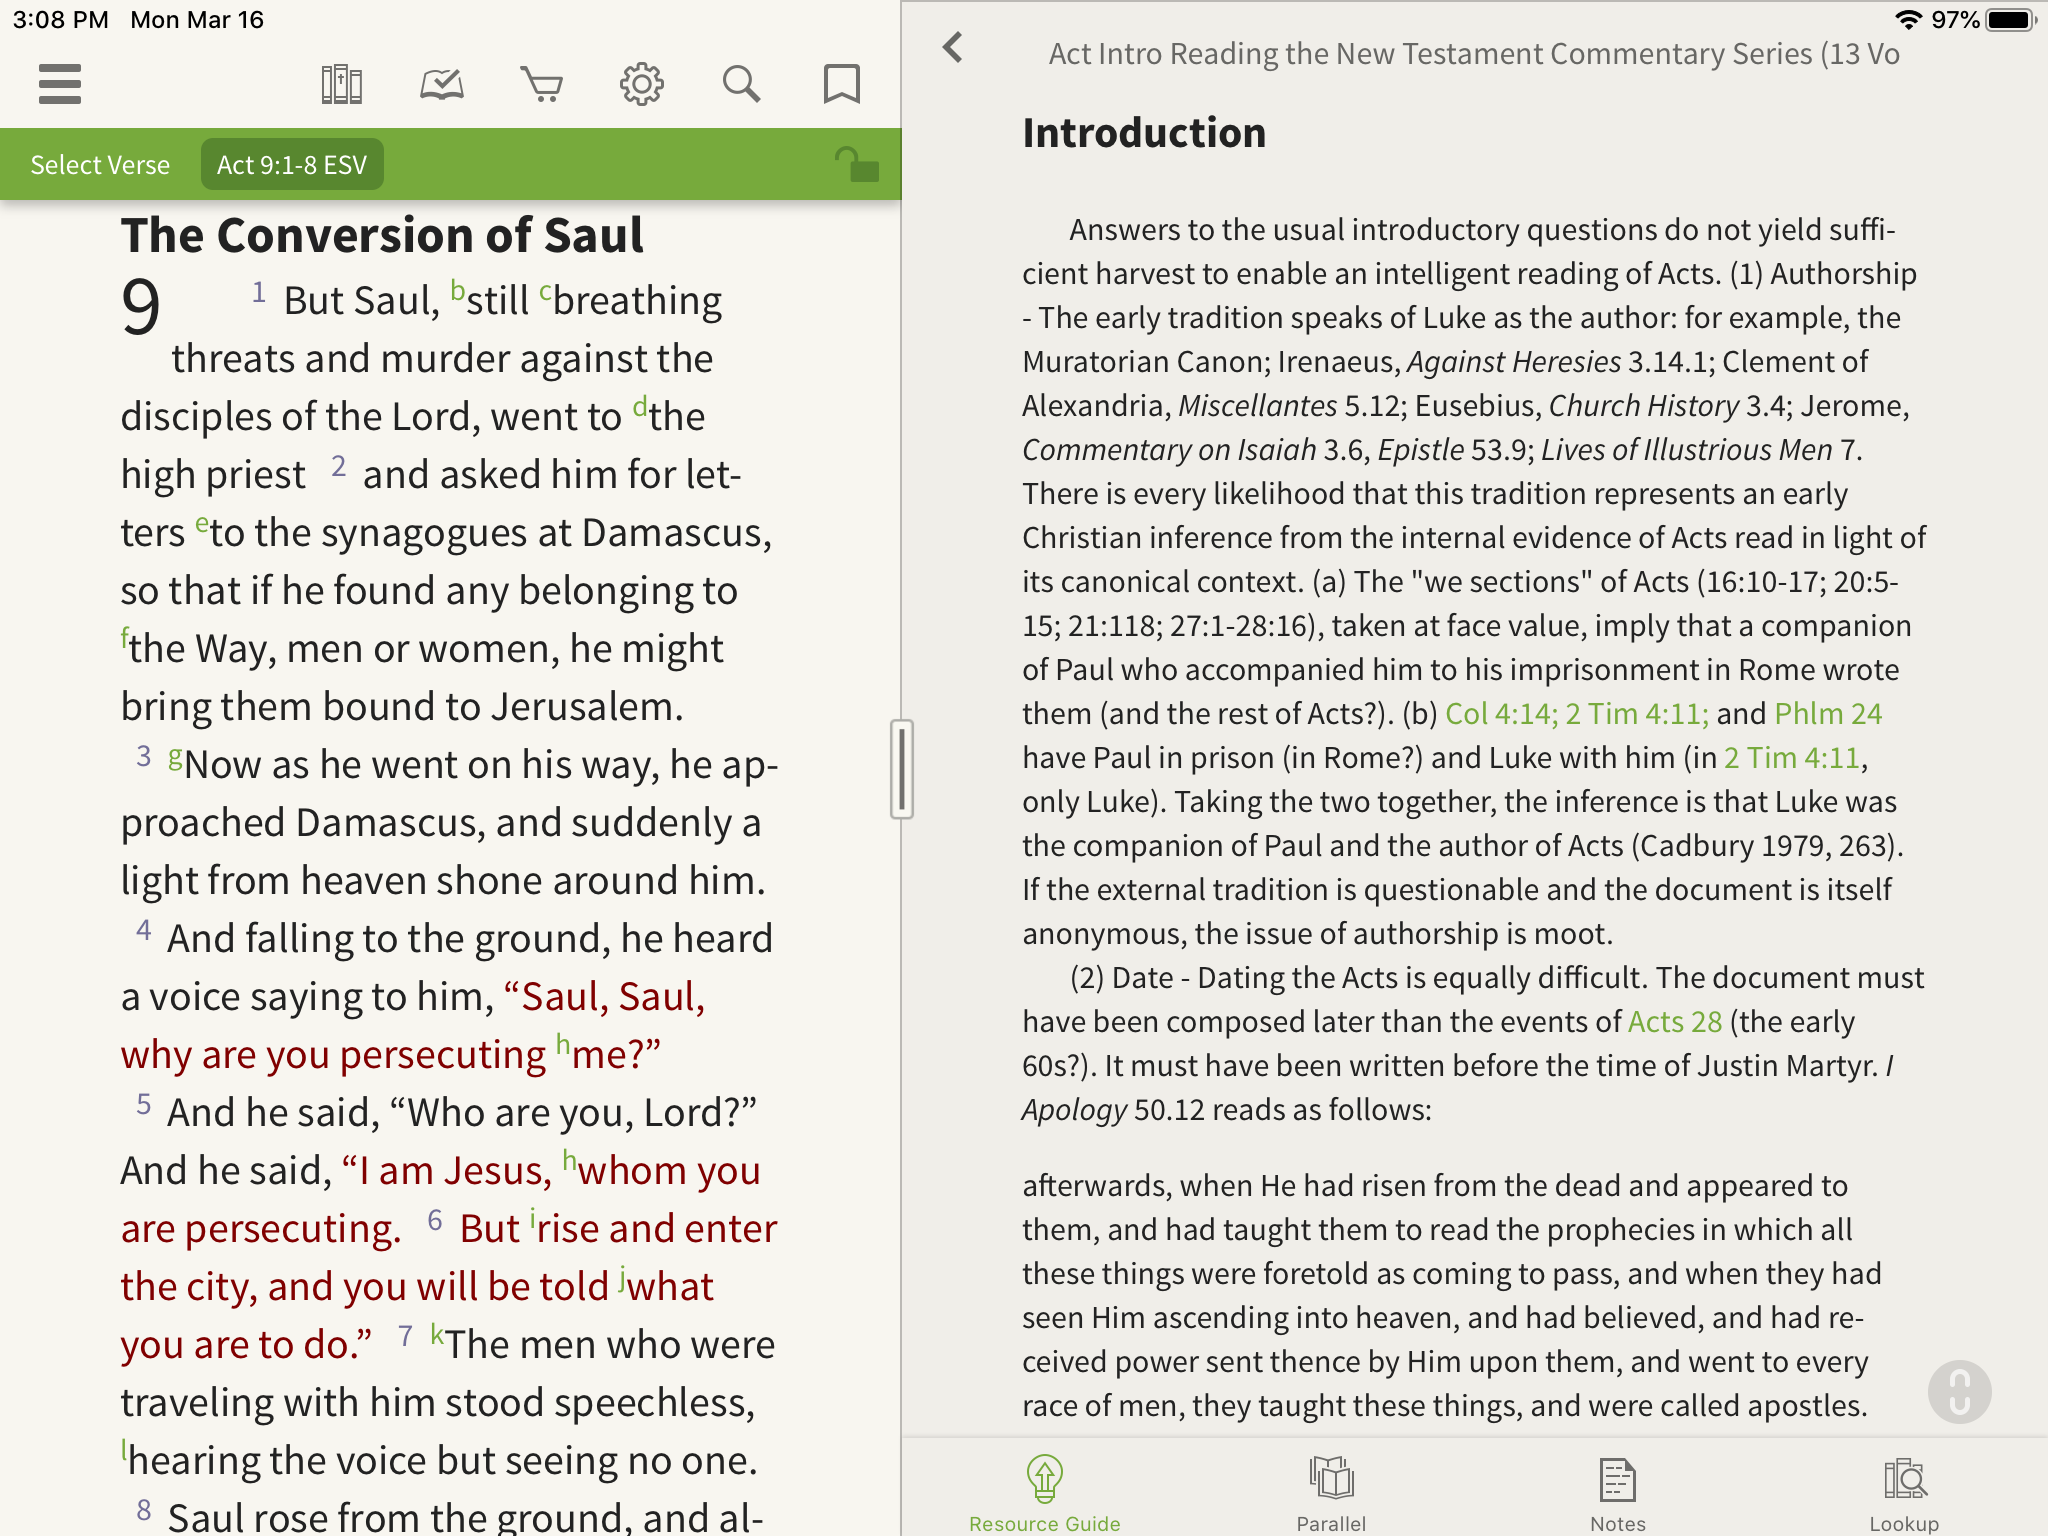 Olive Tree Bible Open up to Acts and Reading the New Testament Commentary introduction